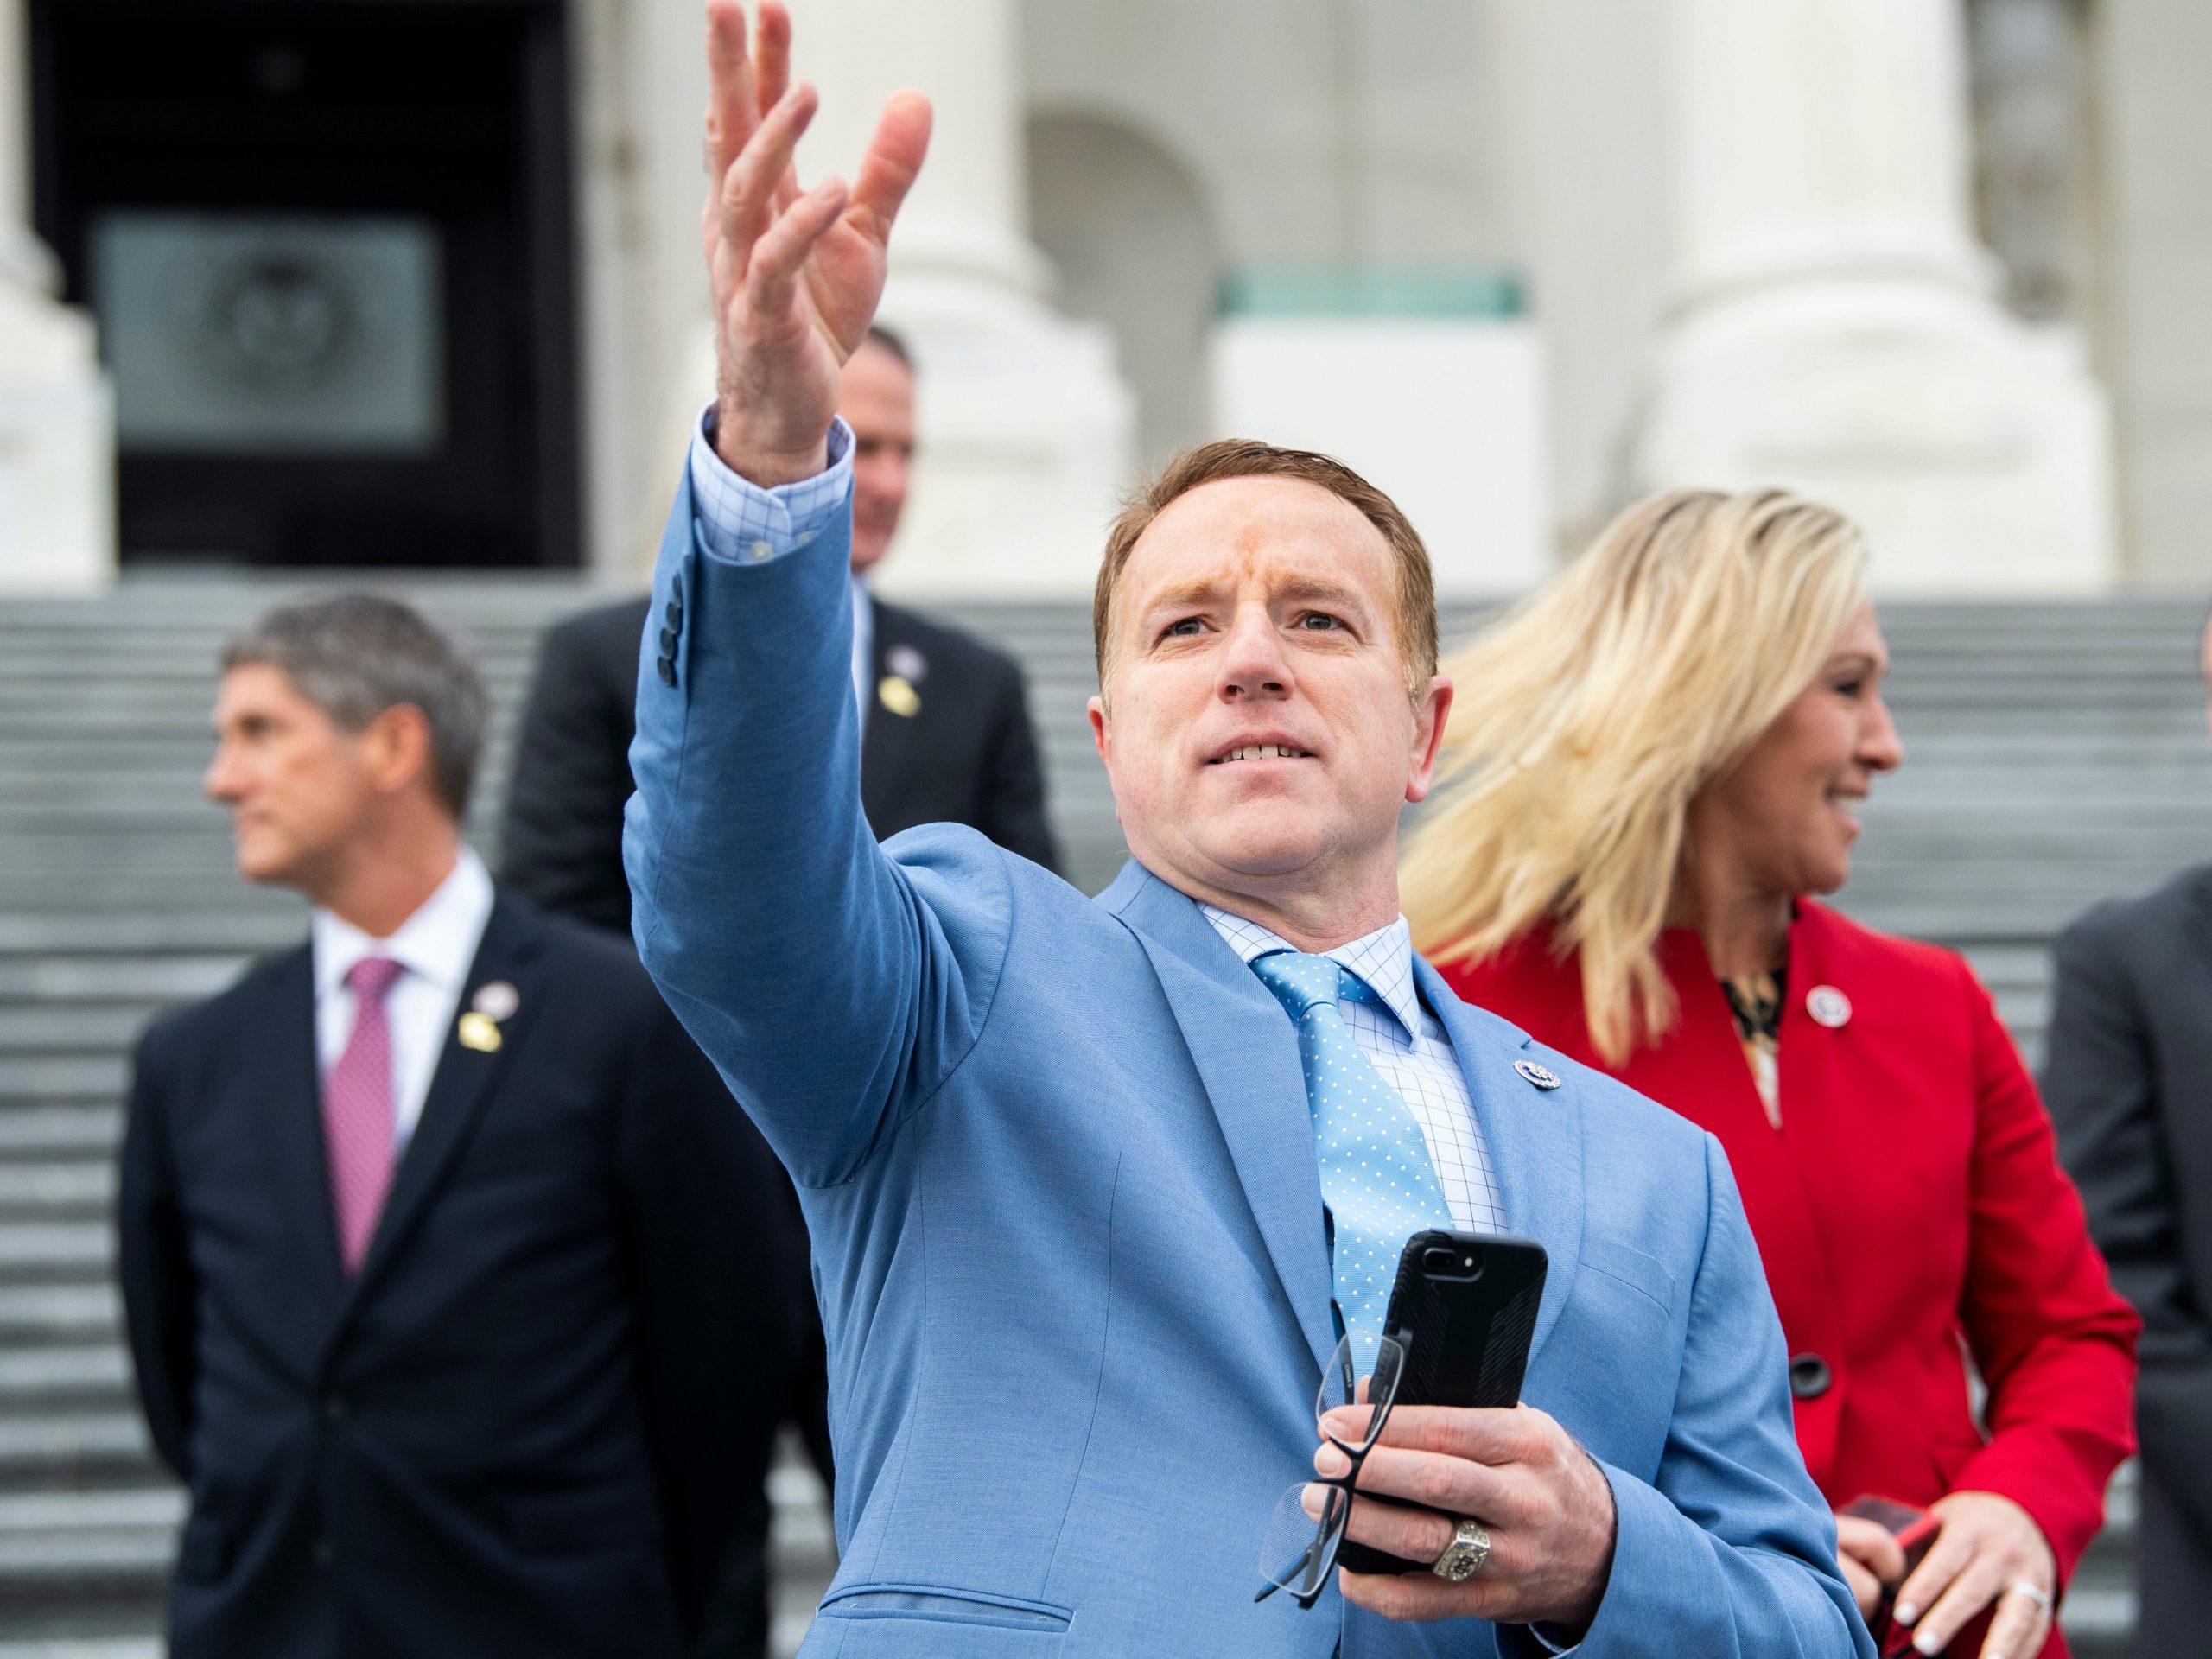 Rep. Pat Fallon waving his right hand and wearing a light blue suit during a group photo with freshman members of the House Republican Conference.